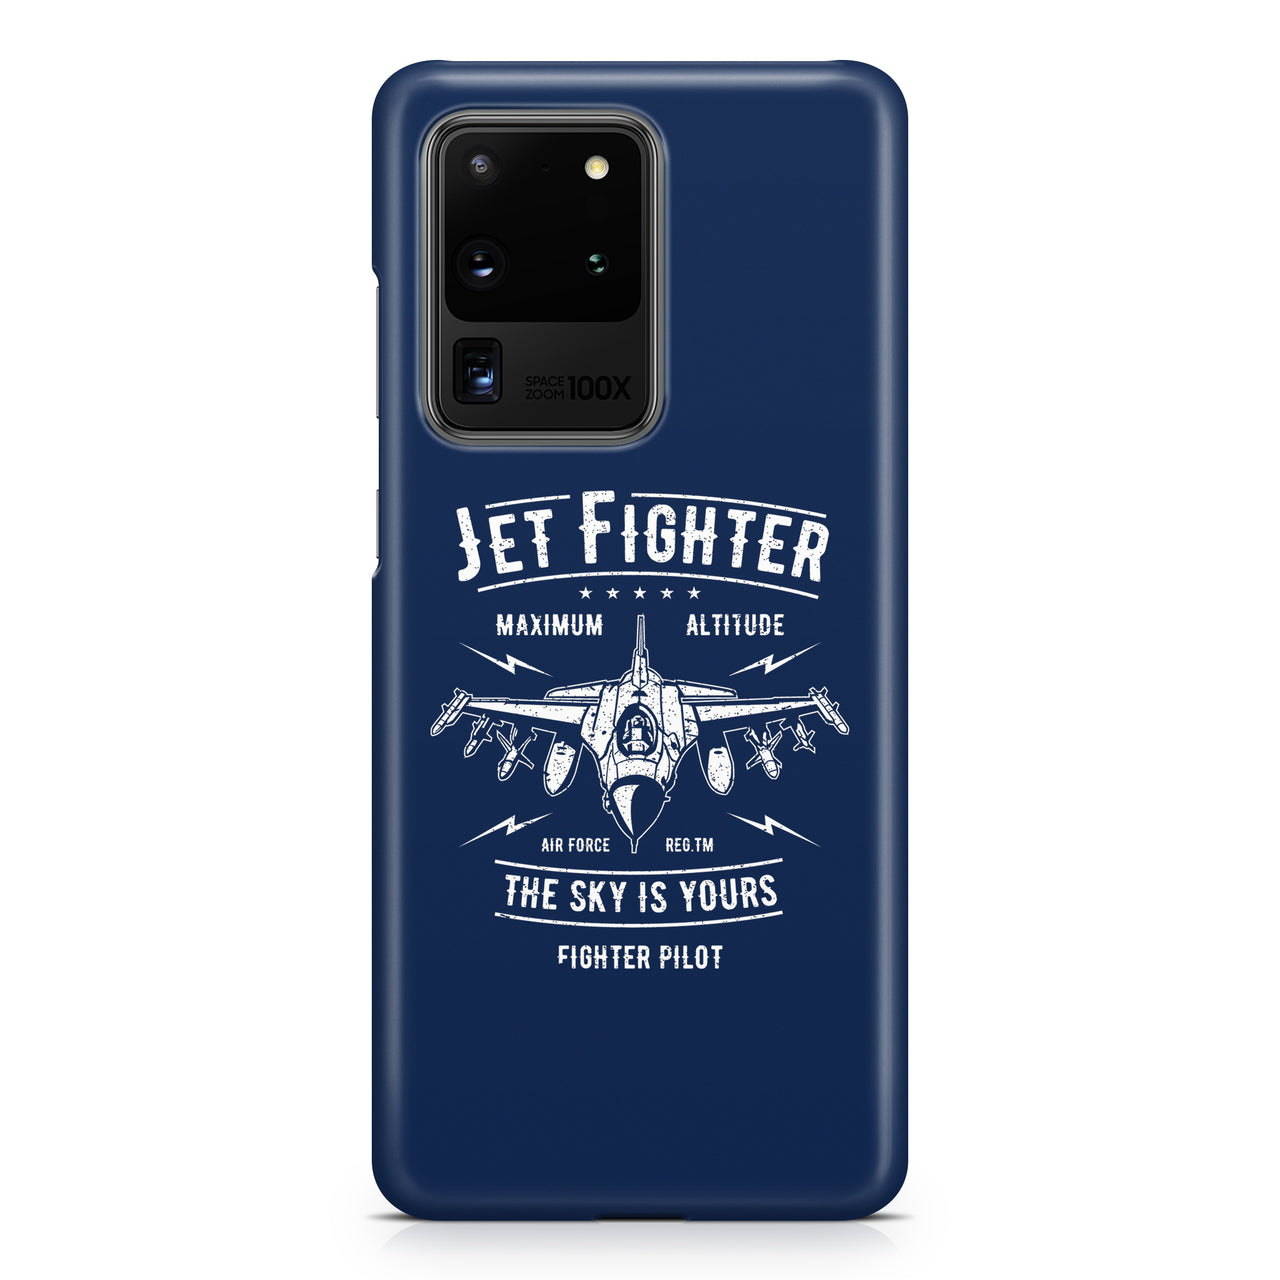 Jet Fighter - The Sky is Yours Samsung A Cases